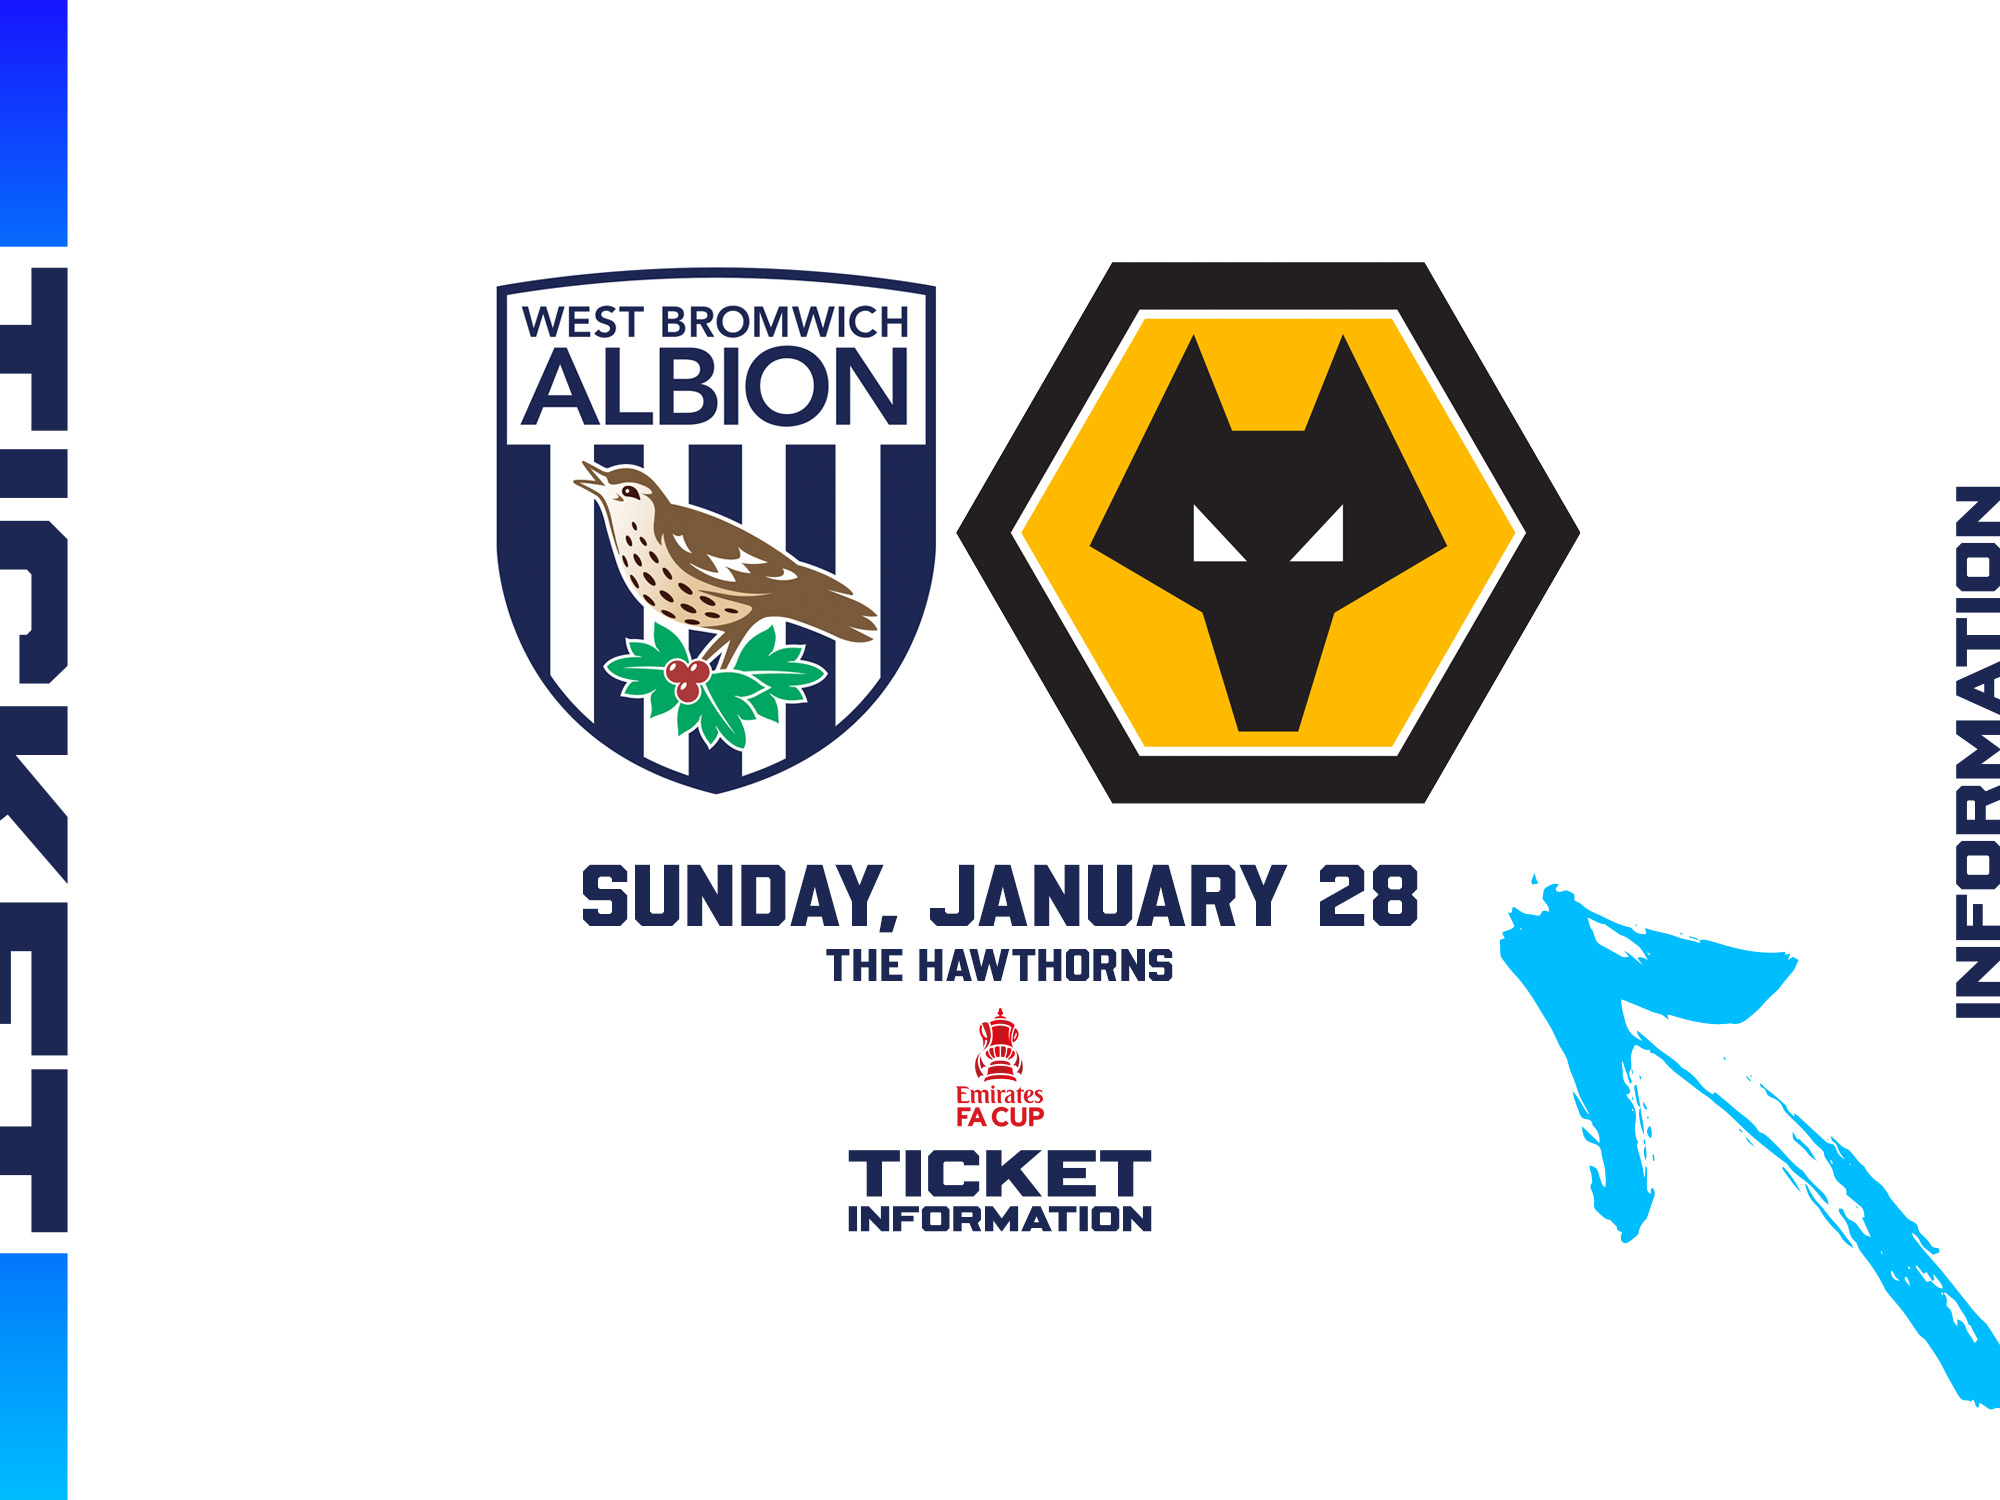 WBA and Wolves badges on the home ticket graphic 